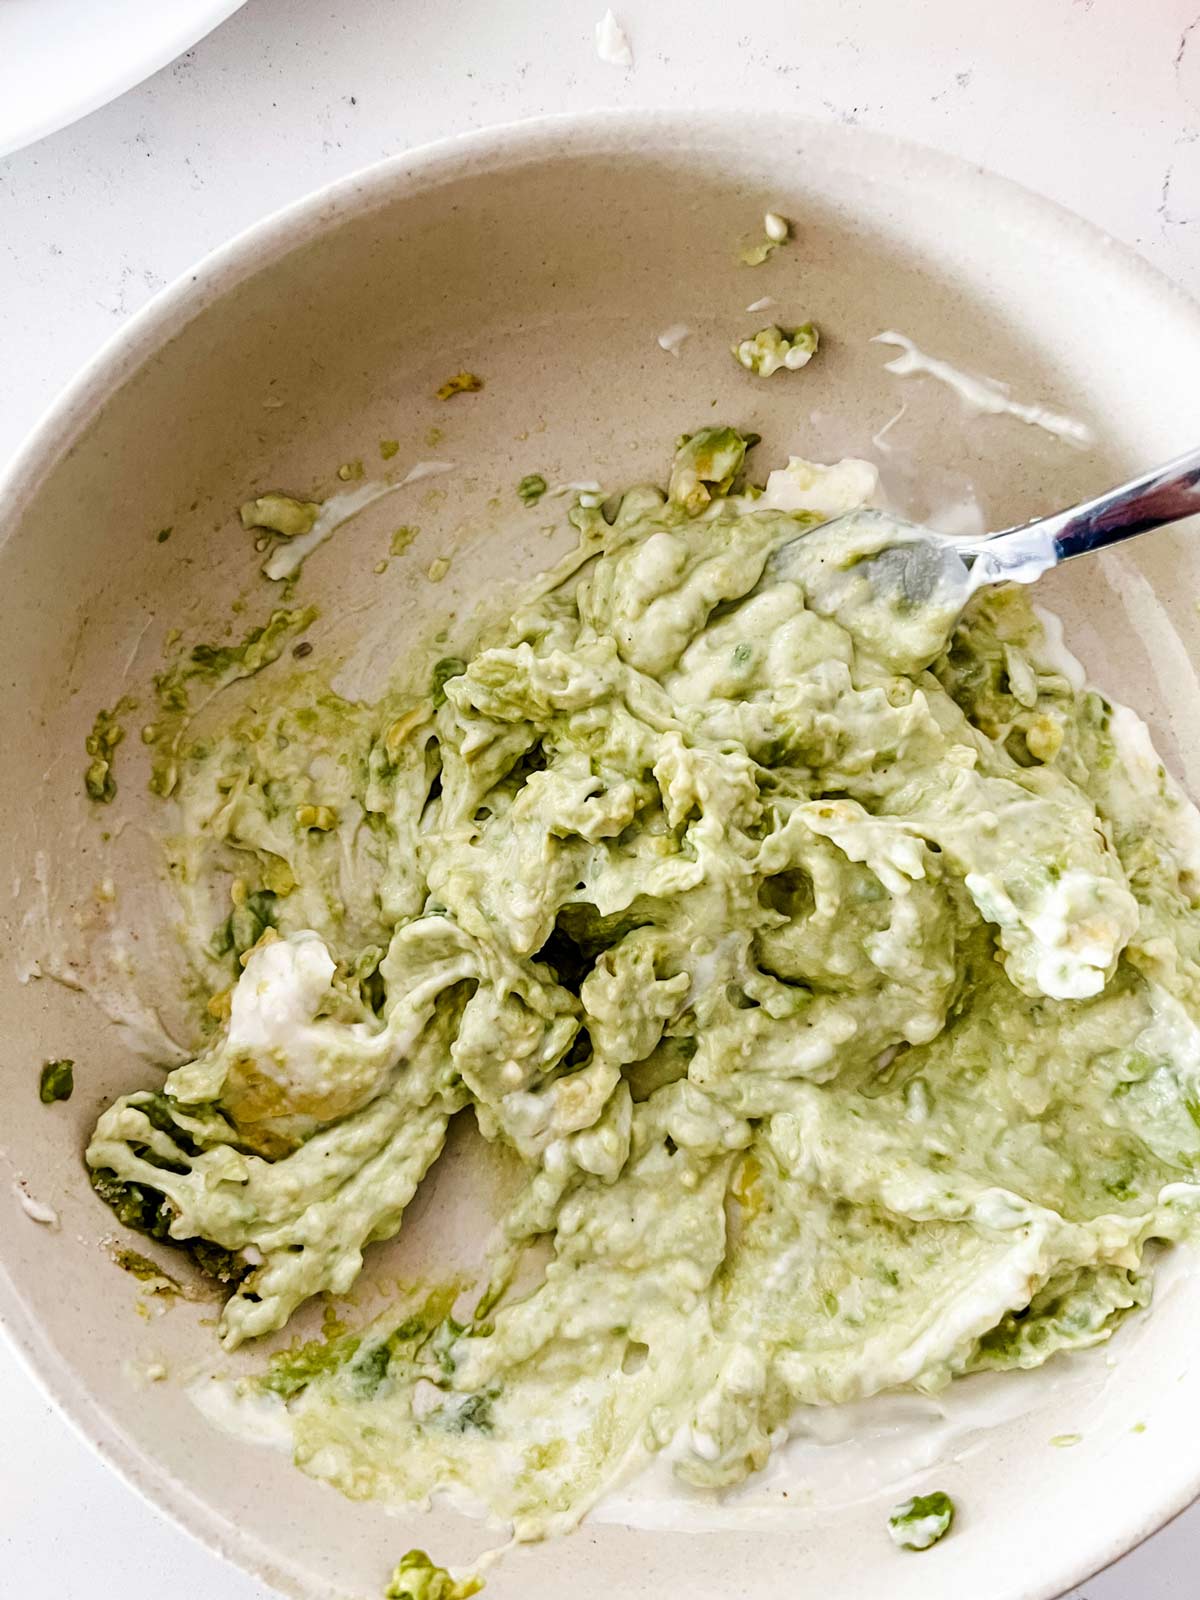 An avocado mayo mixture in a shallow bowl.